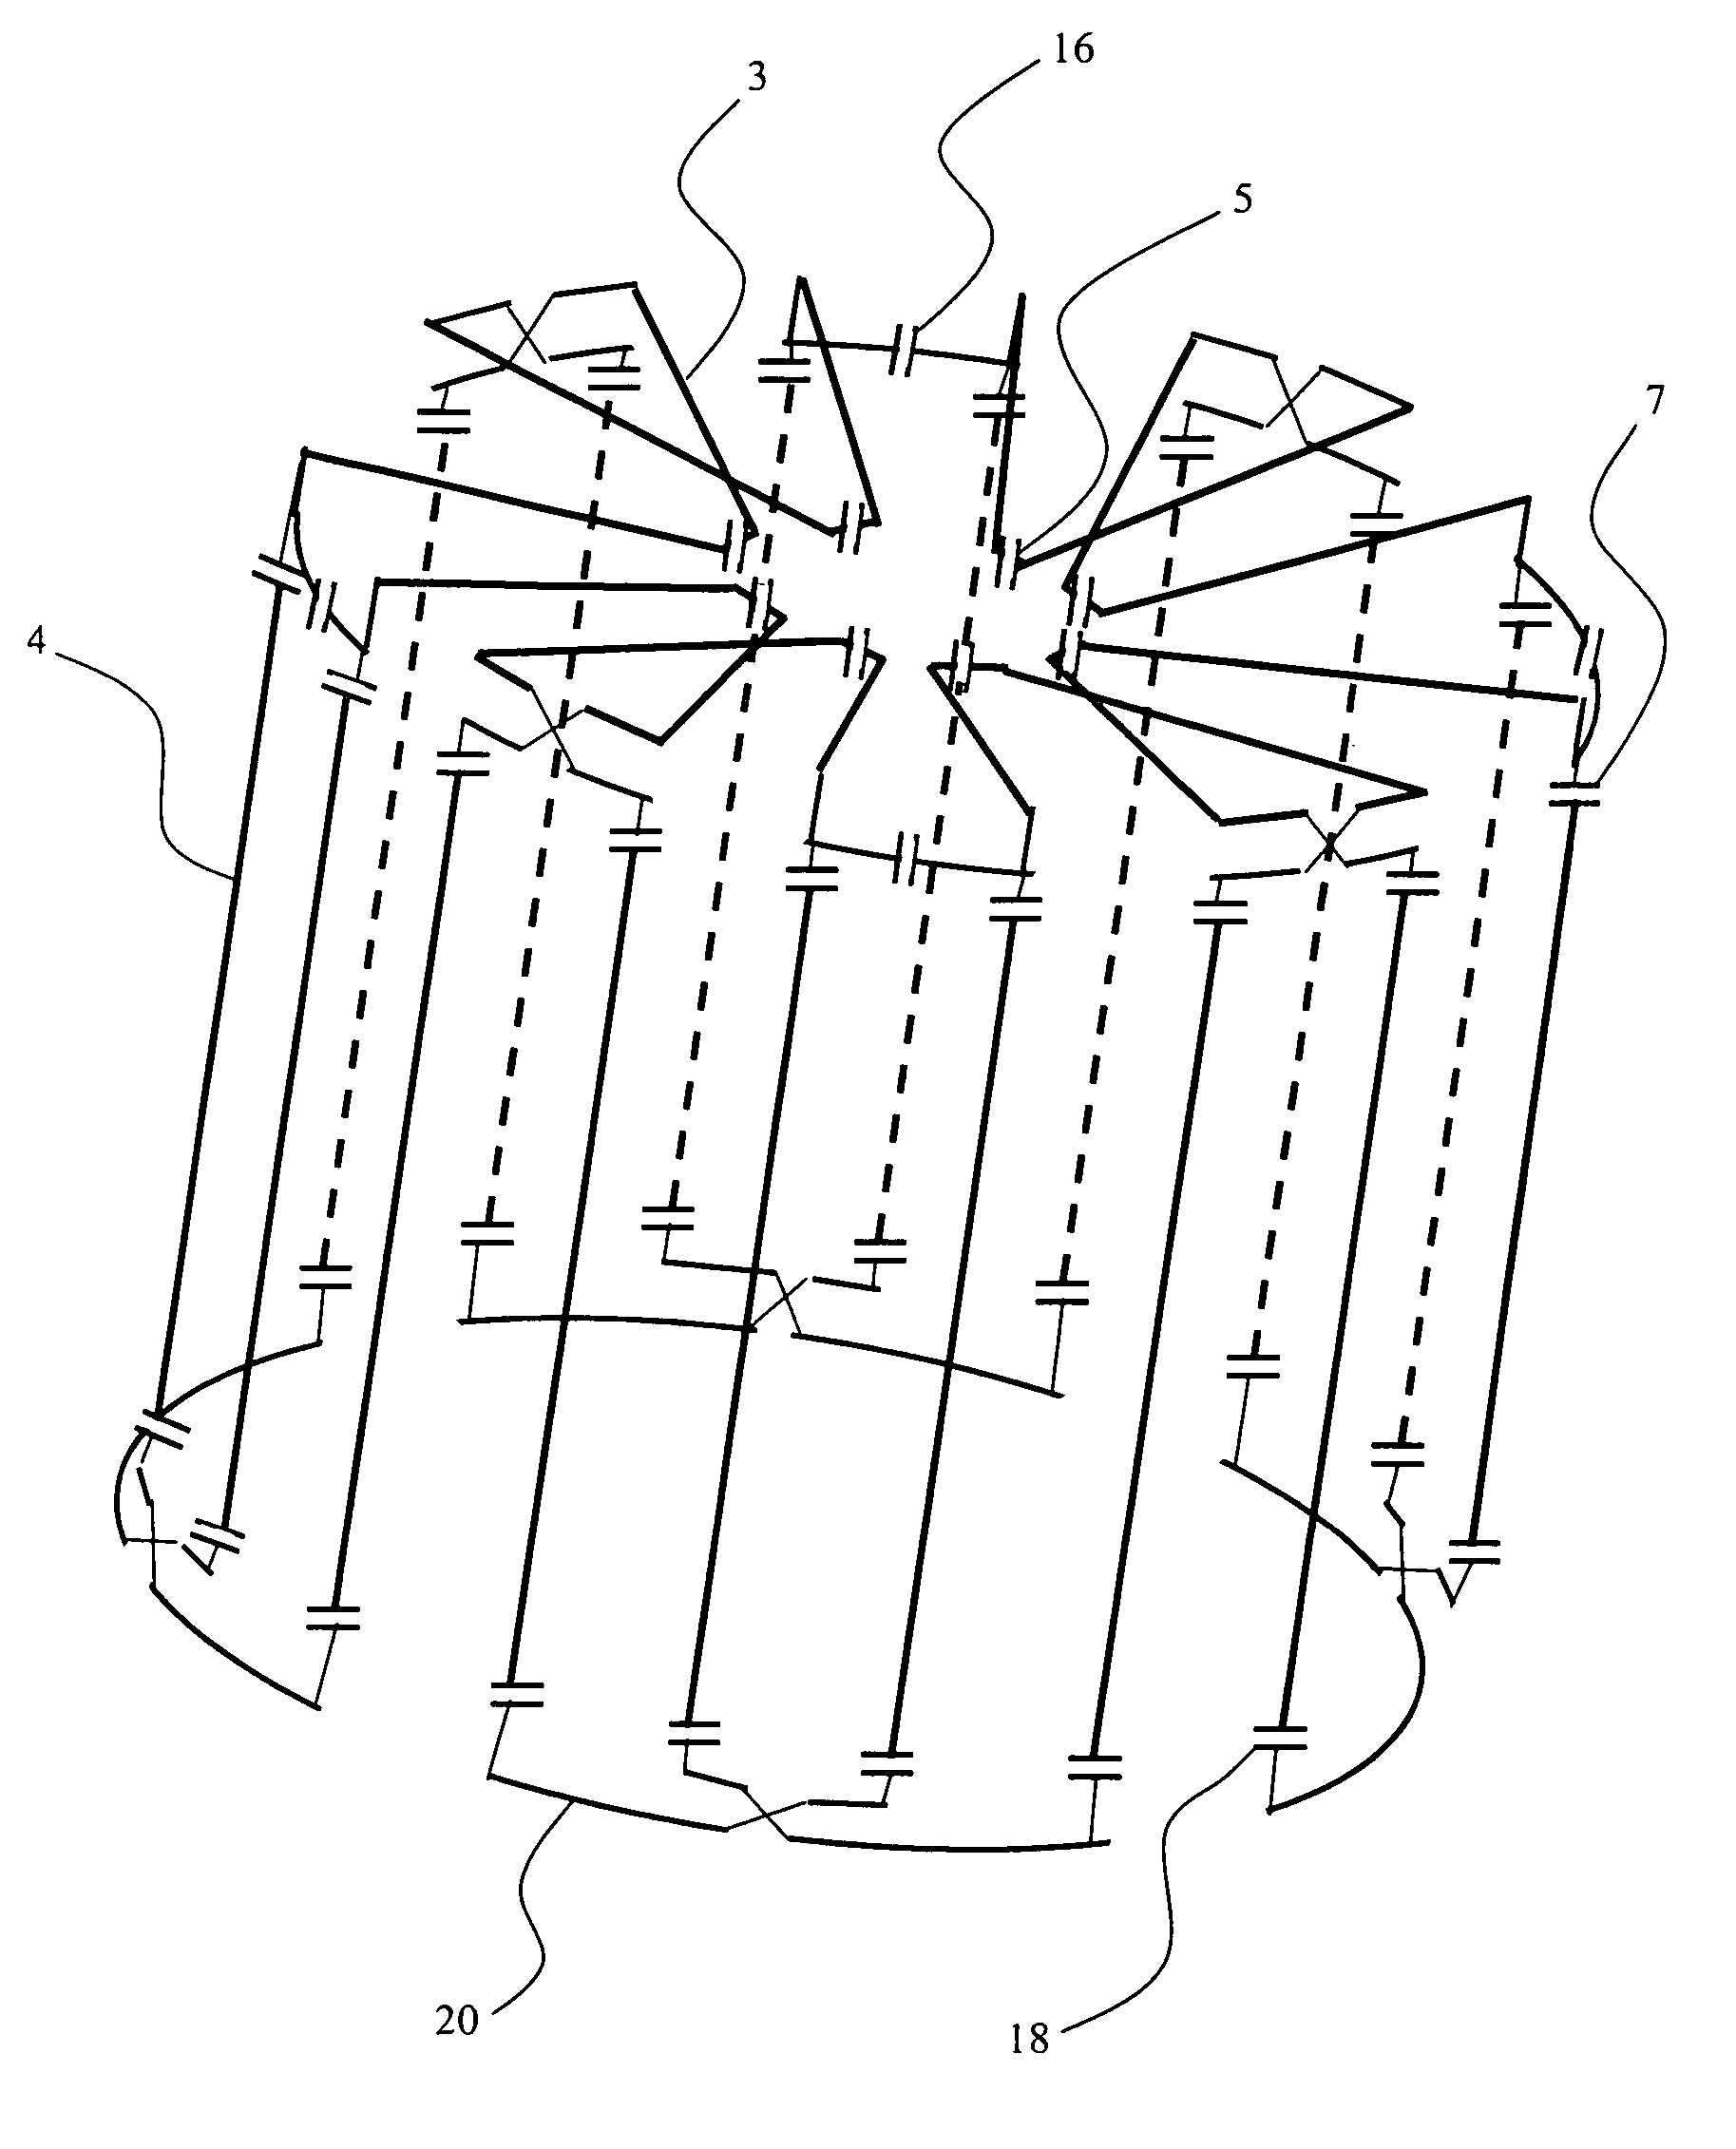 High field head coil for dual-mode operation in magnetic resonance imaging